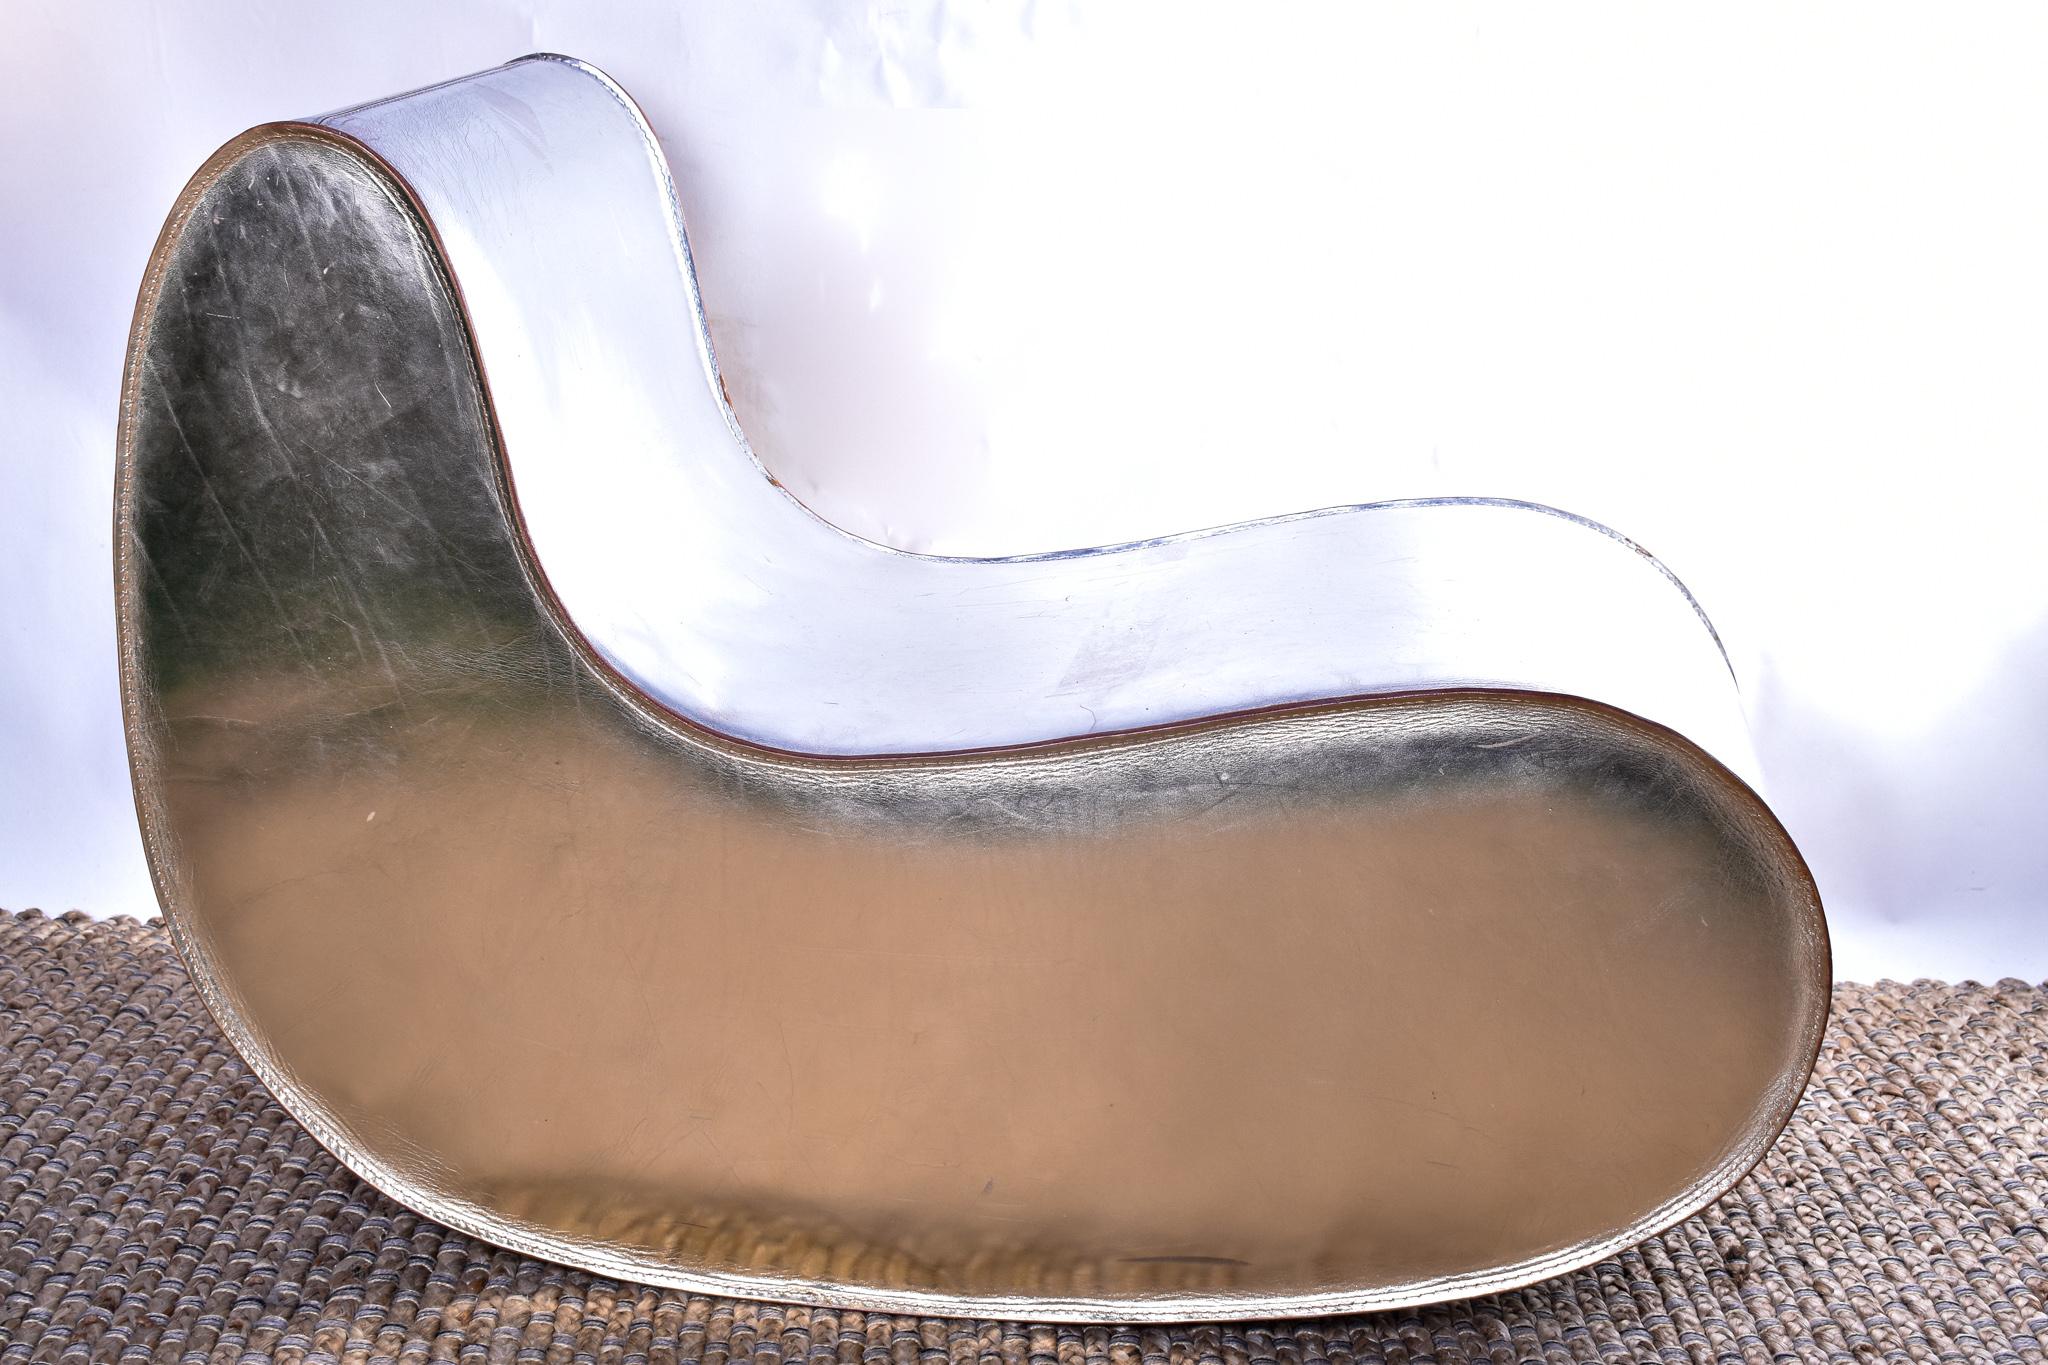 An incredibly funky multi use Sutra chair by Gregorio Spini for Italian manufacturer Kundalini, when placed in various assemblages vertically or horizontally, forms a soft rocking chair, sitting island, ottoman or side table. Stitched silver leather